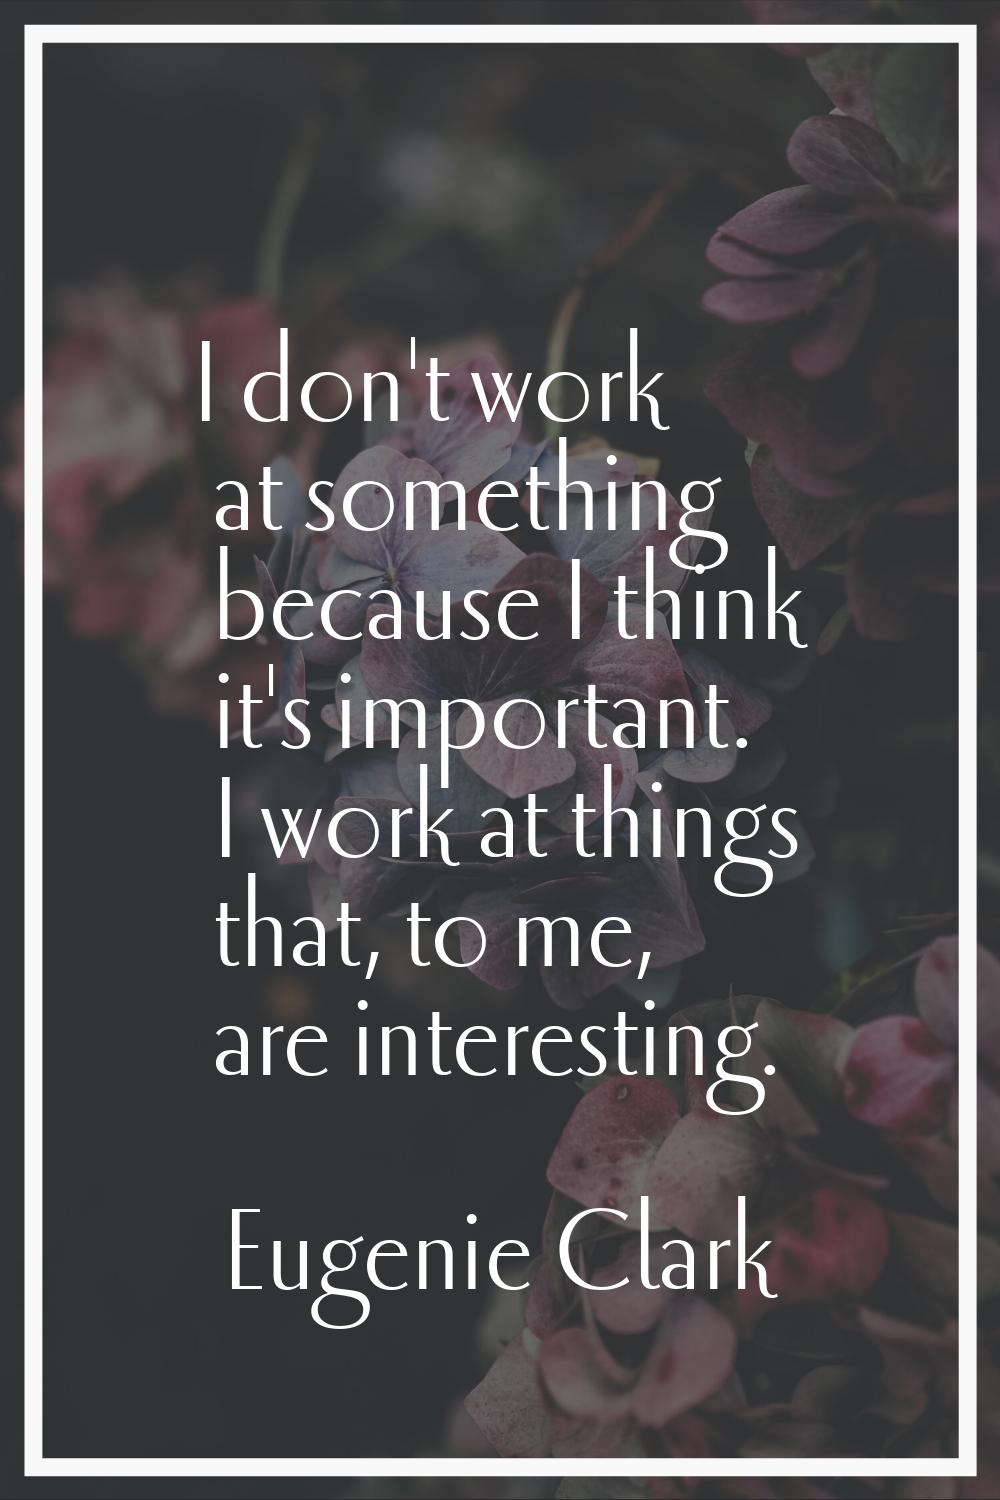 I don't work at something because I think it's important. I work at things that, to me, are interes